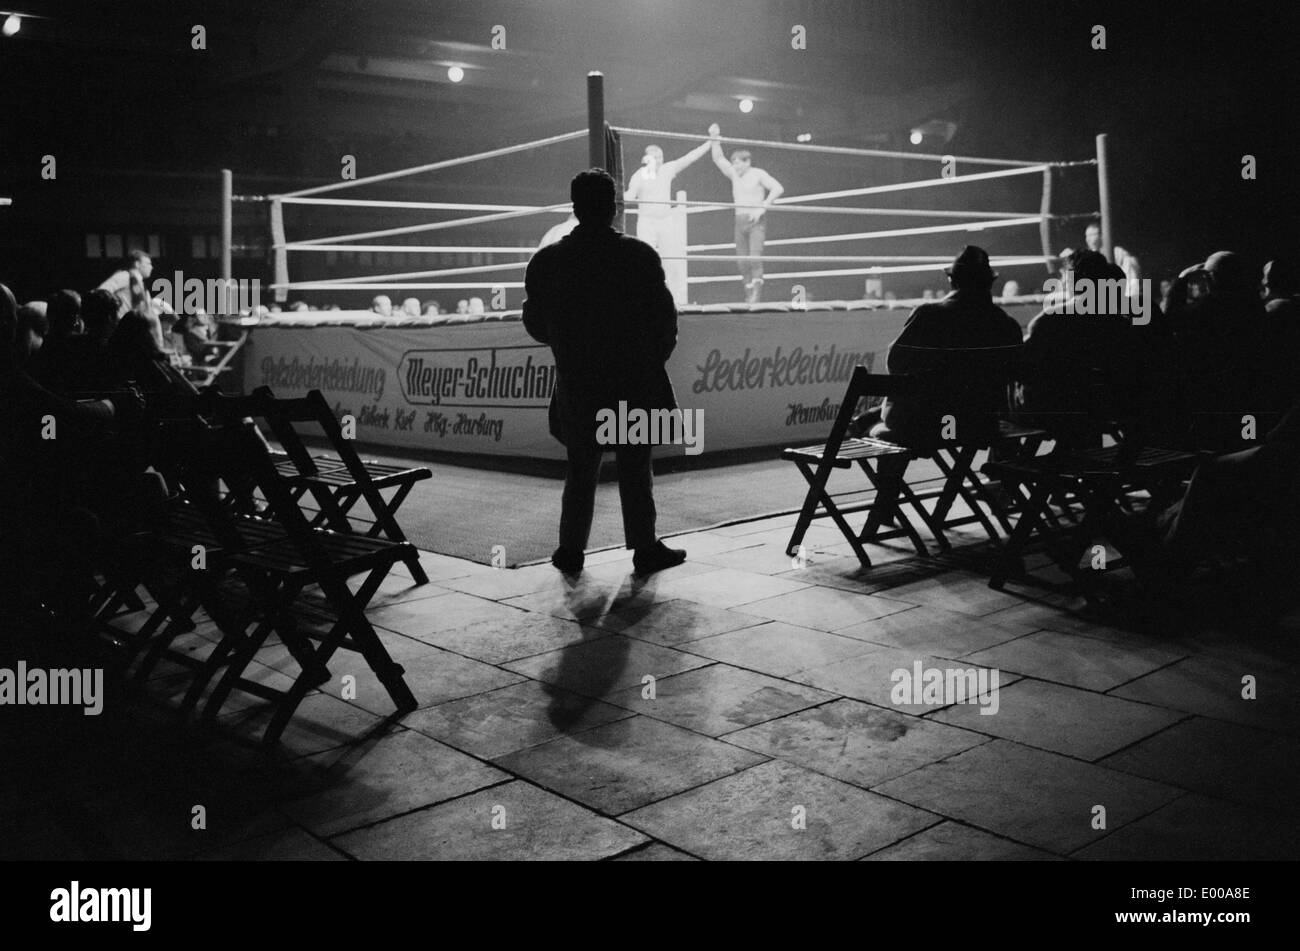 Boxing ring Black and White Stock Photos & Images - Alamy